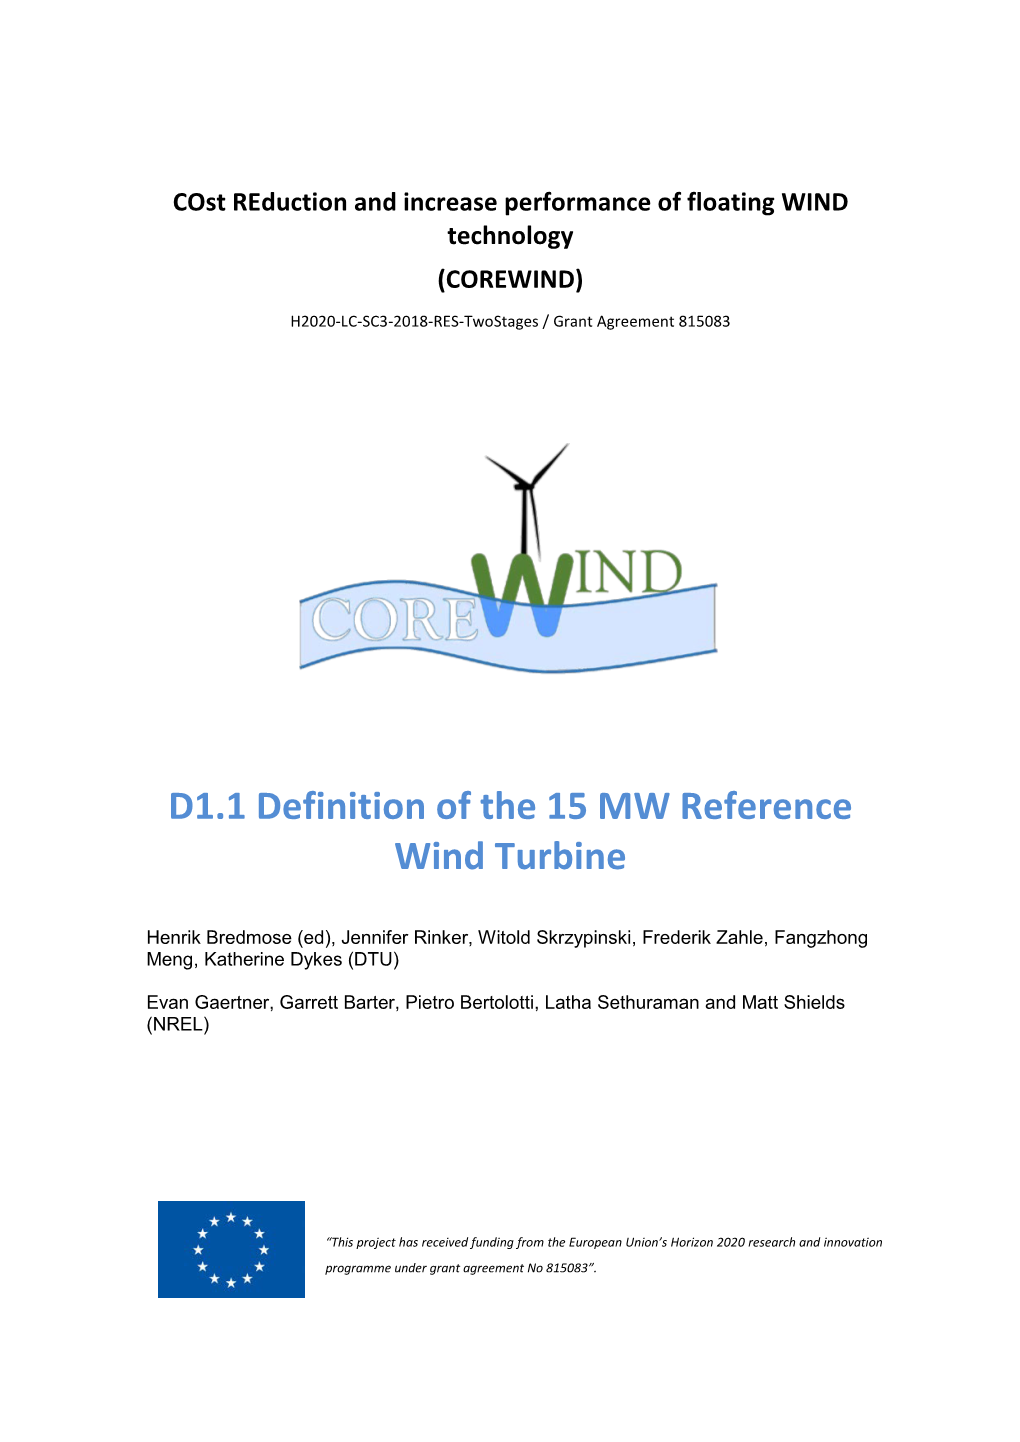 D1.1 Definition of the 15 MW Reference Wind Turbine